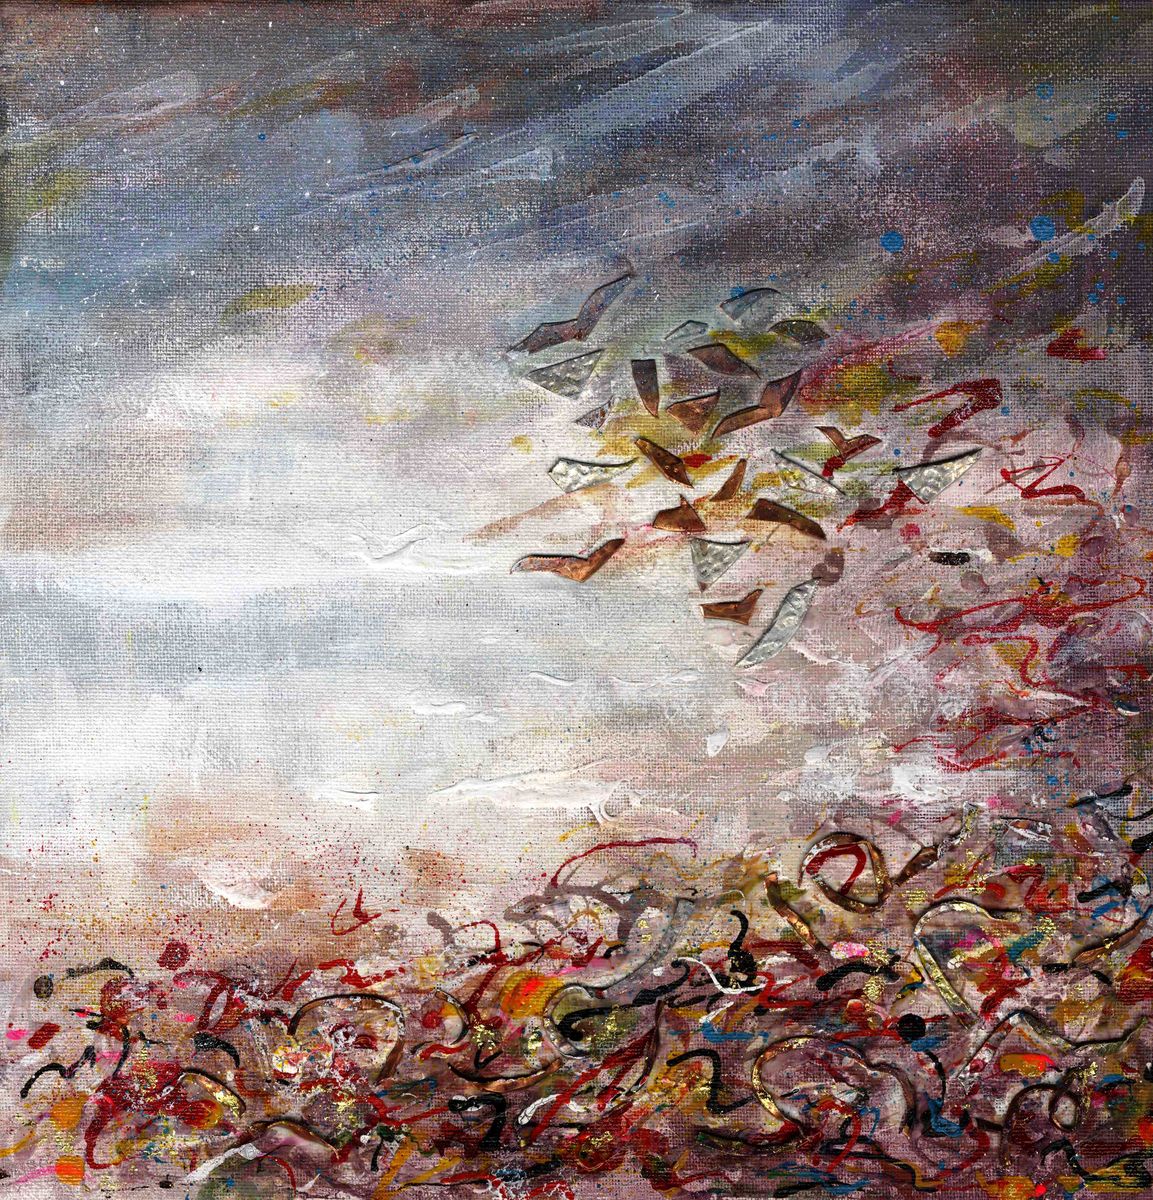 This very textured image painted by artist Jane Glue from Orkney, Scotland is on canvas. The bird shapes are made out of tiny bits of copper which have been over painted with splatters of bright red, pink and orange. The sea is a foaming swirl of white. 